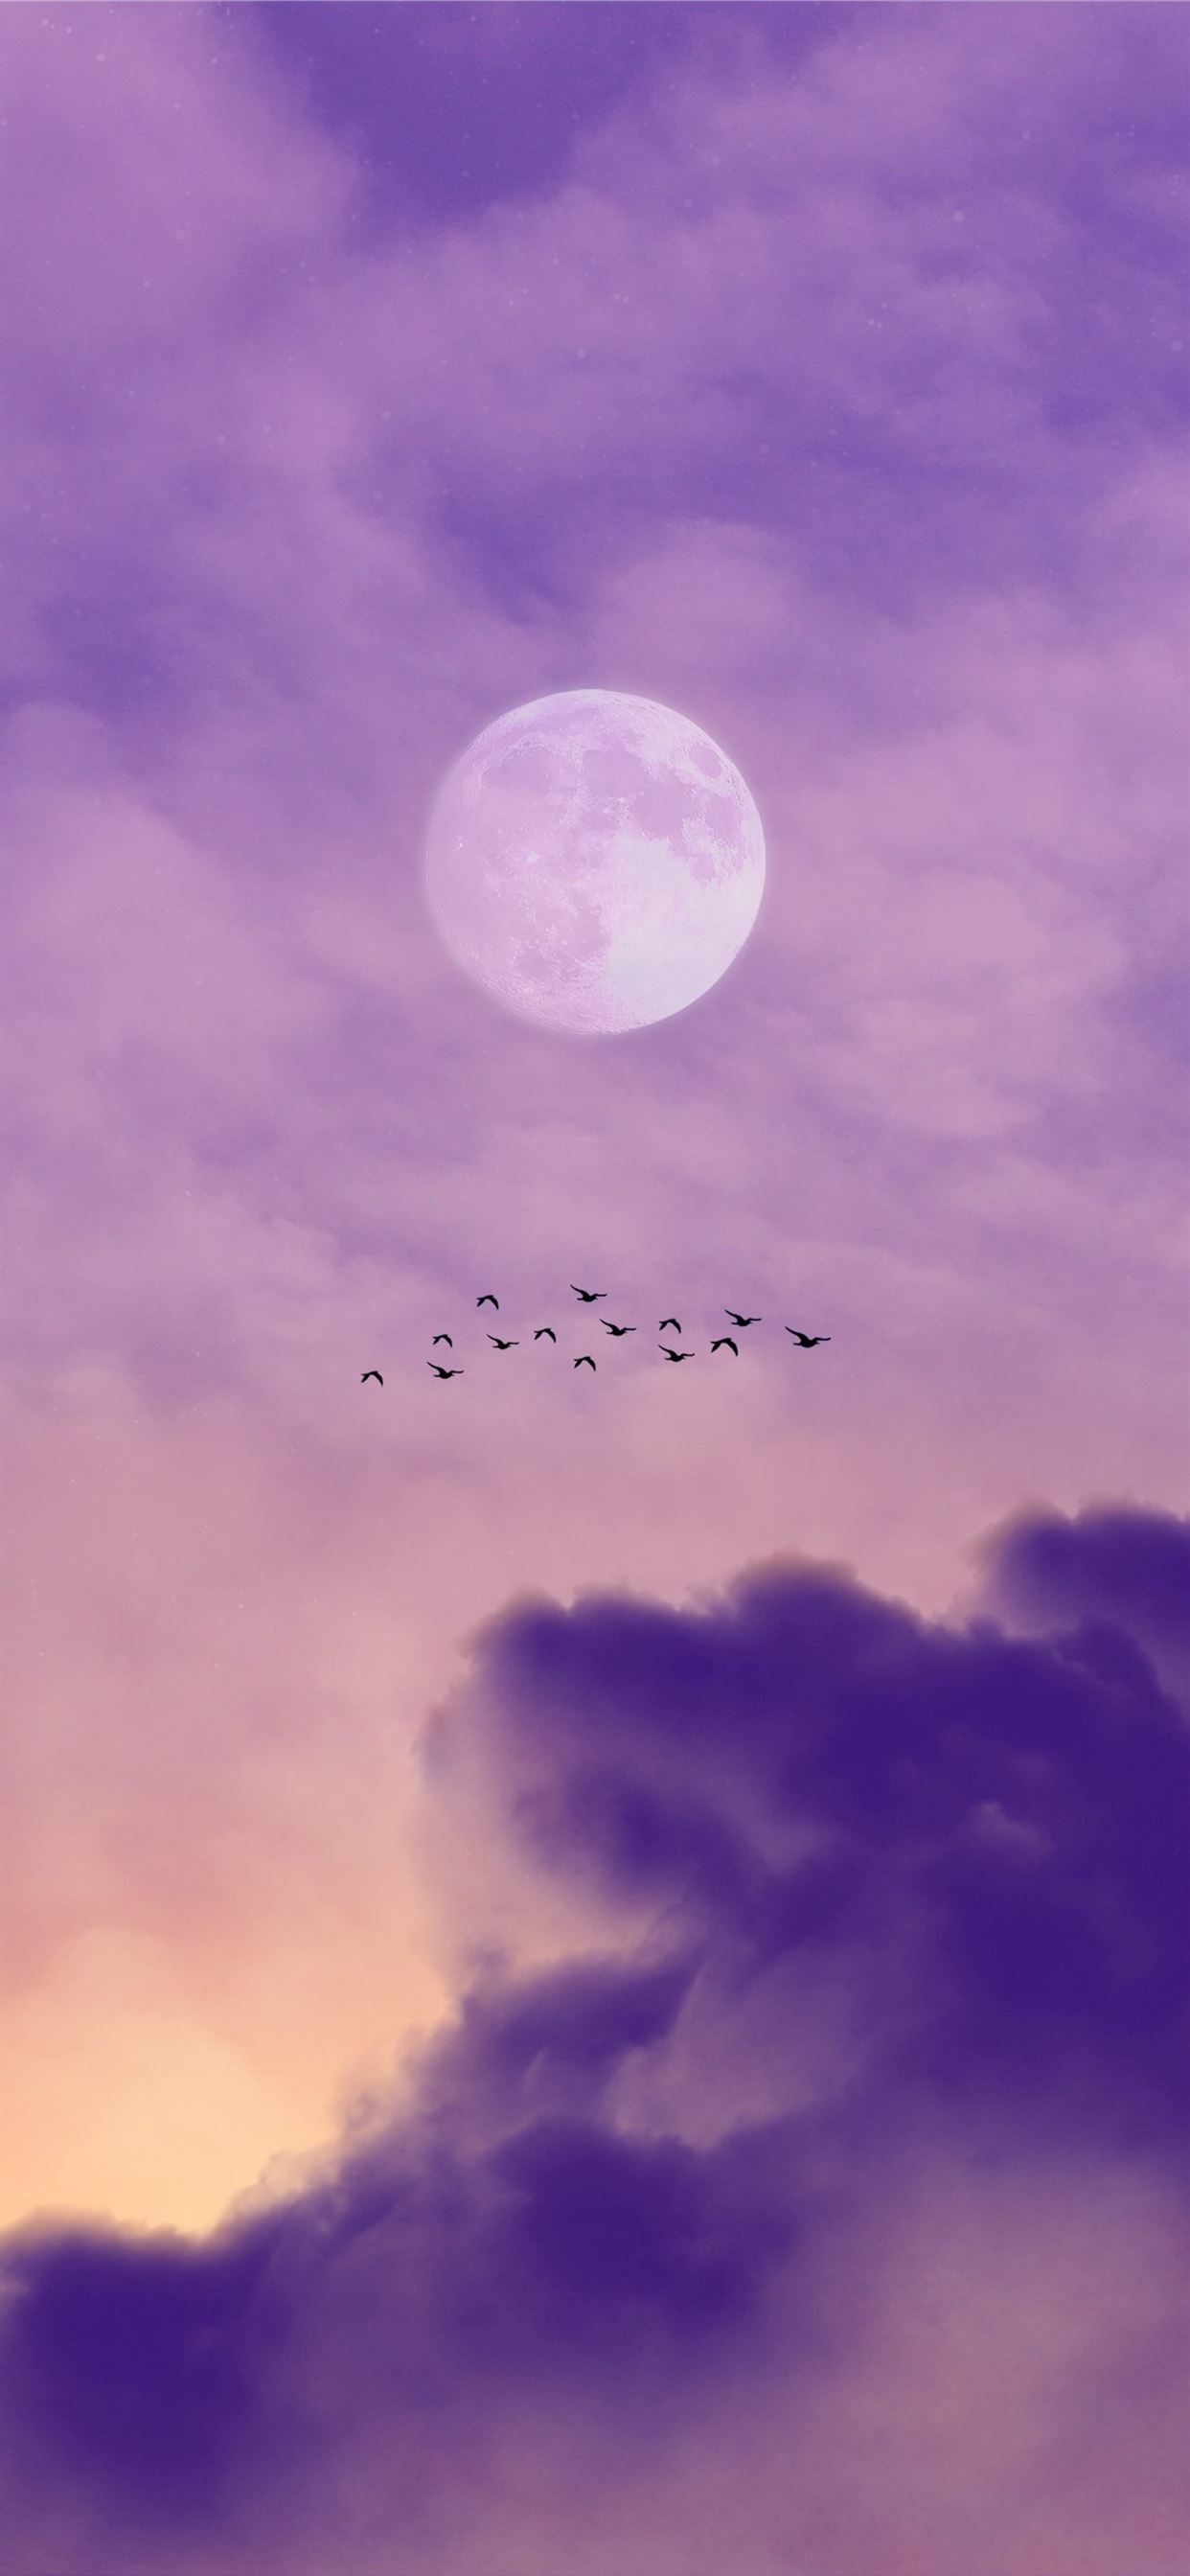 full moon over clouds during night time iPhone X Wallpaper Free Download